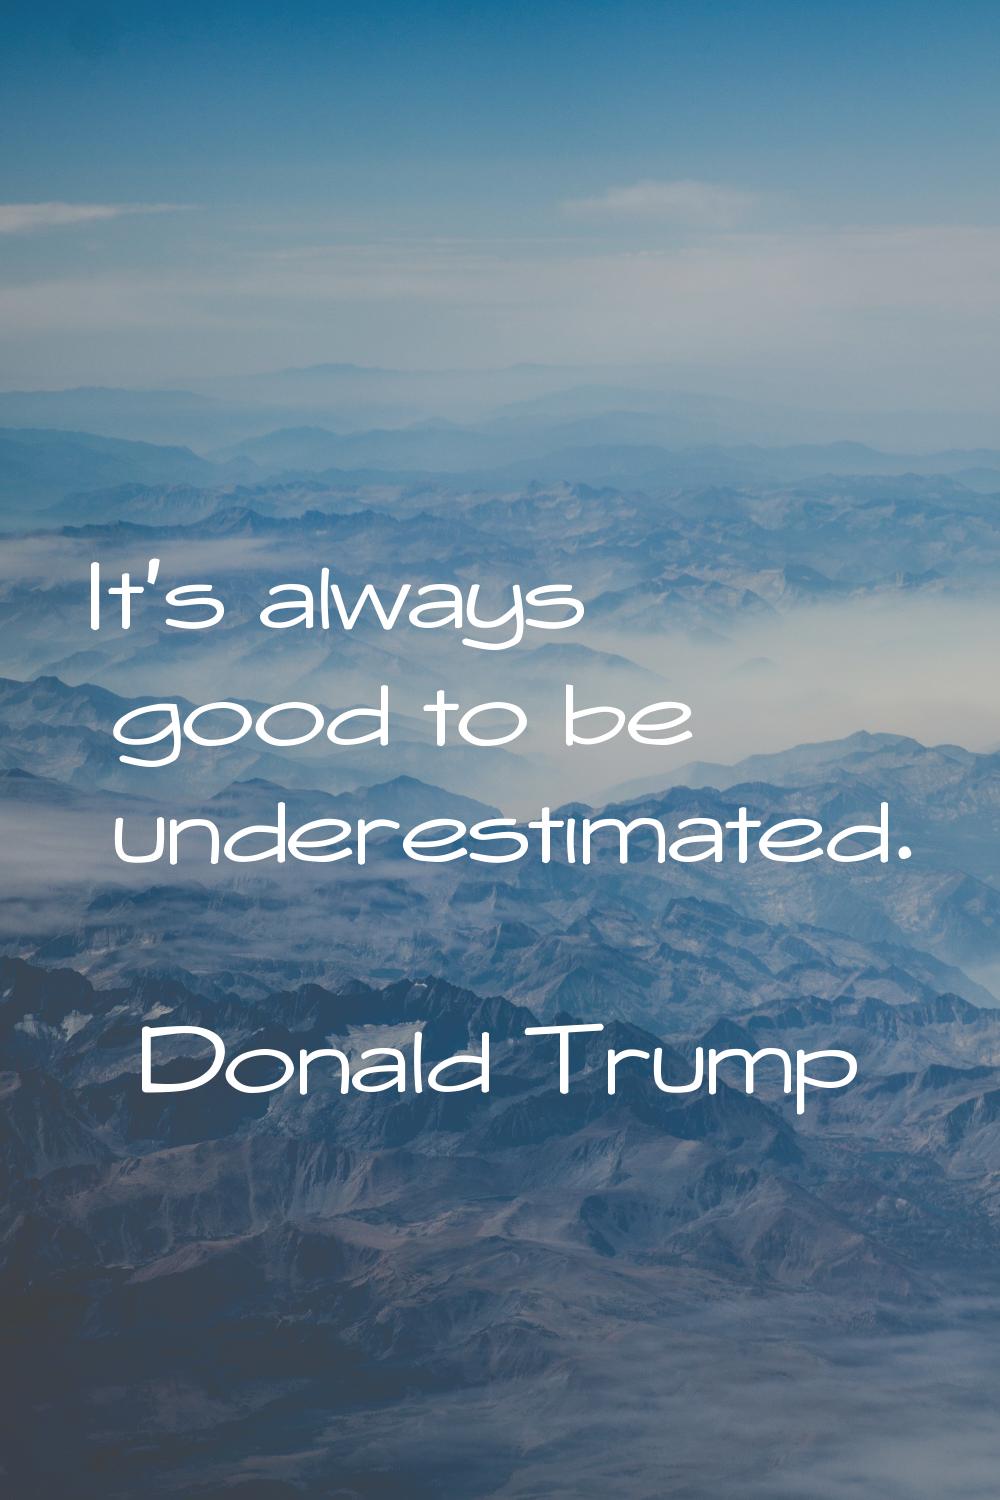 It's always good to be underestimated.